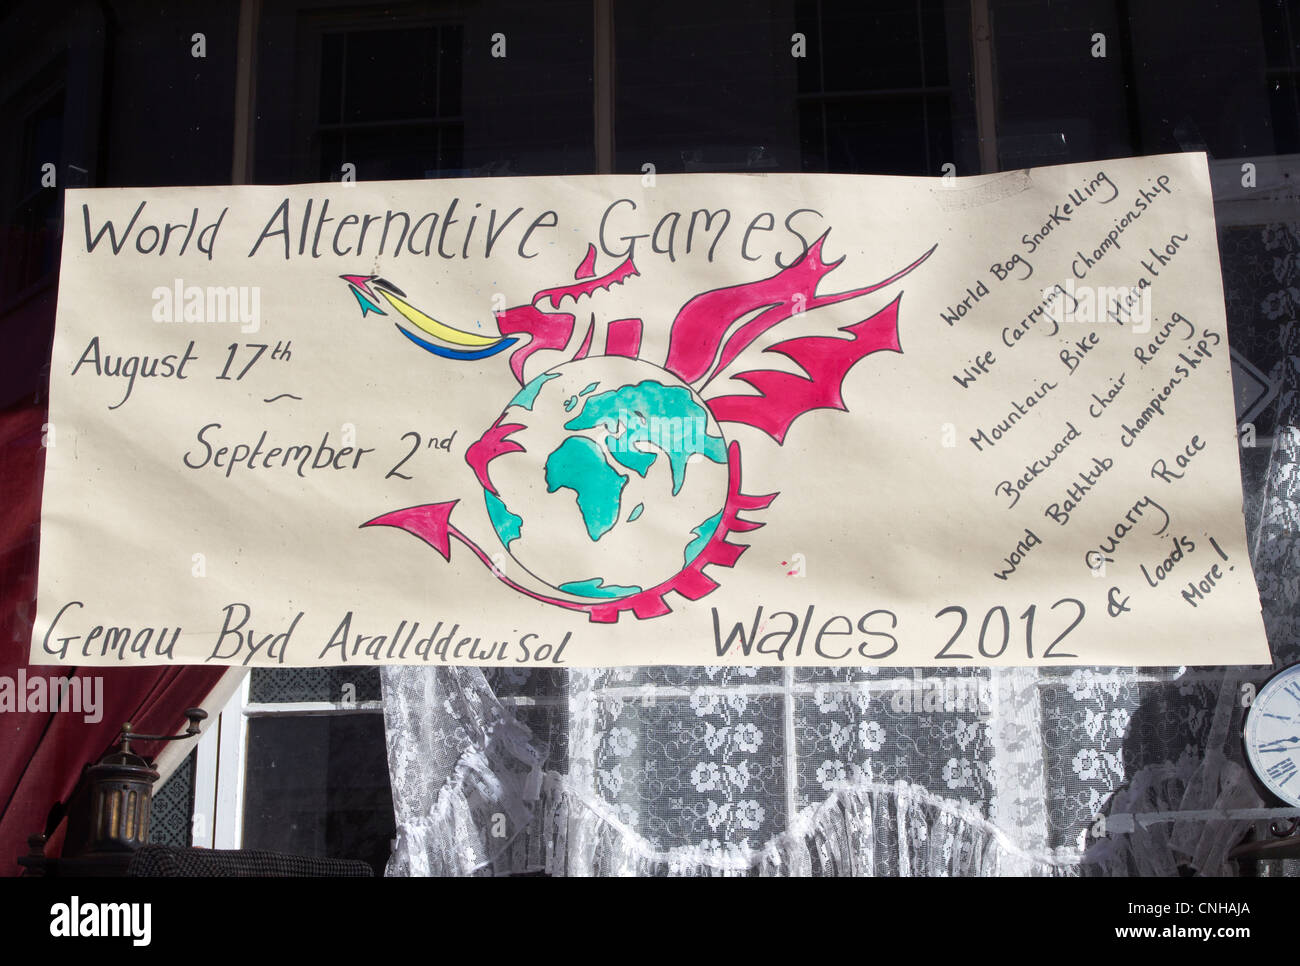 World Alternative Games poster in a shop window in Llanwrtyd Wells, Powys UK. Stock Photo